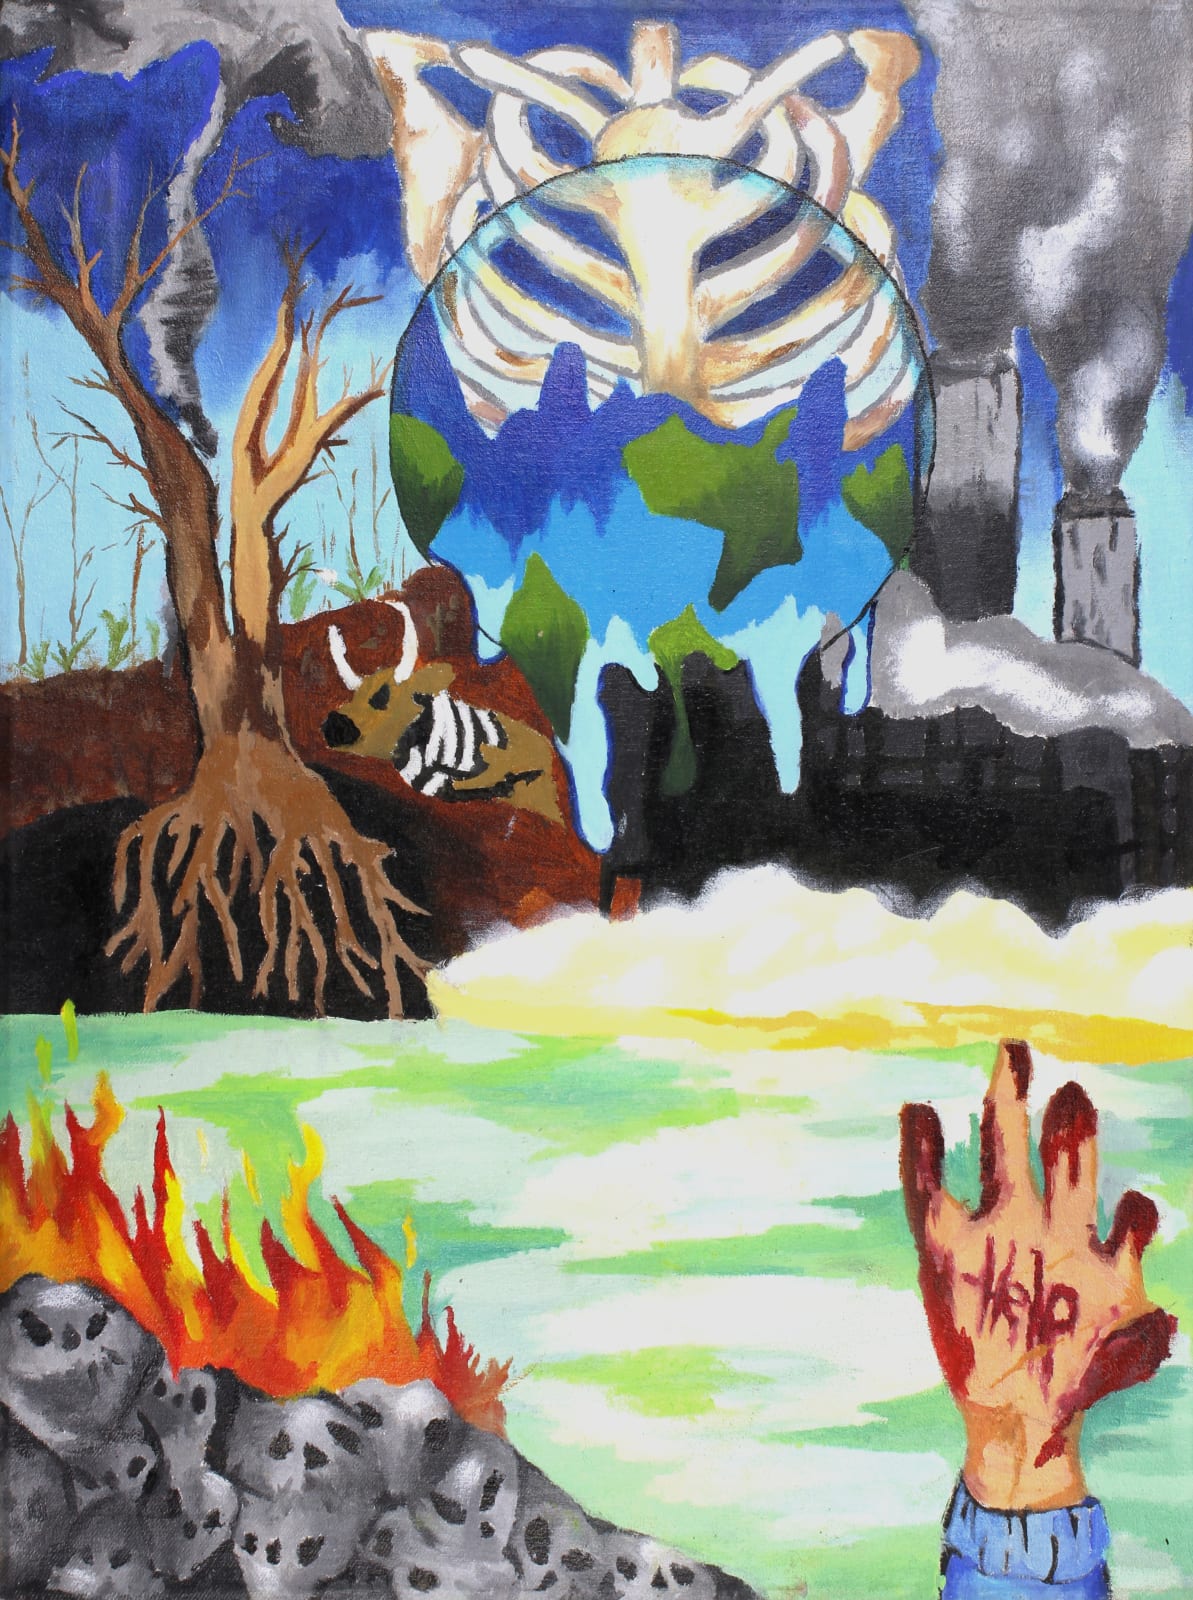 Middle School 3rd Place $100 MATTHEW ANSBACK (TENNYSON MIDDLE SCHOOL) LOOK WHAT YOU'VE DONE [74] Oil on canvas